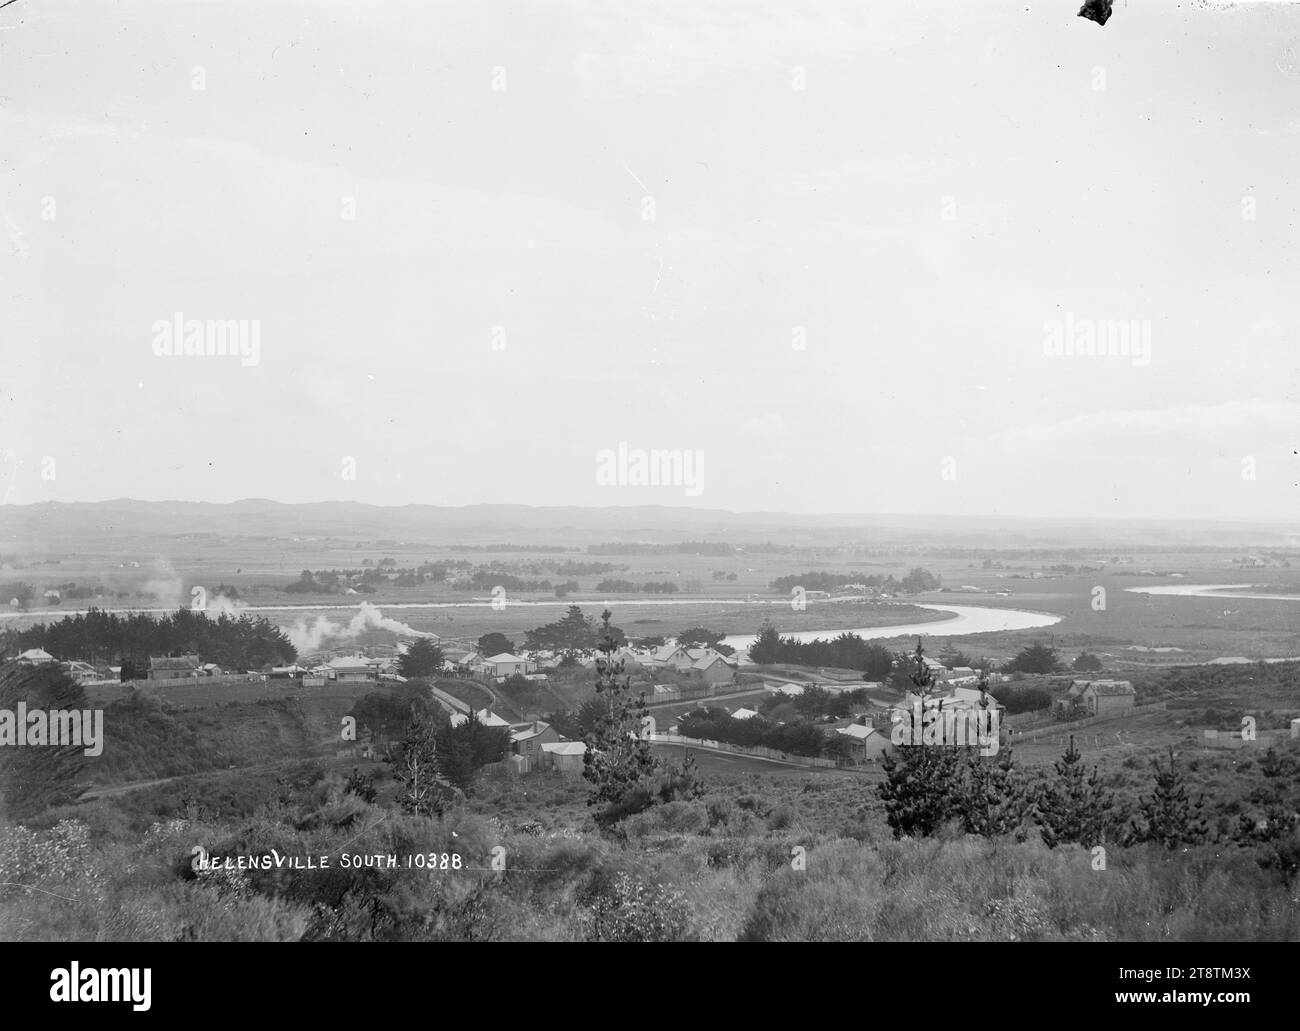 View of Helensville South, View of Helensville South taken from a vantage point looking down over the area in early 1900s Stock Photo